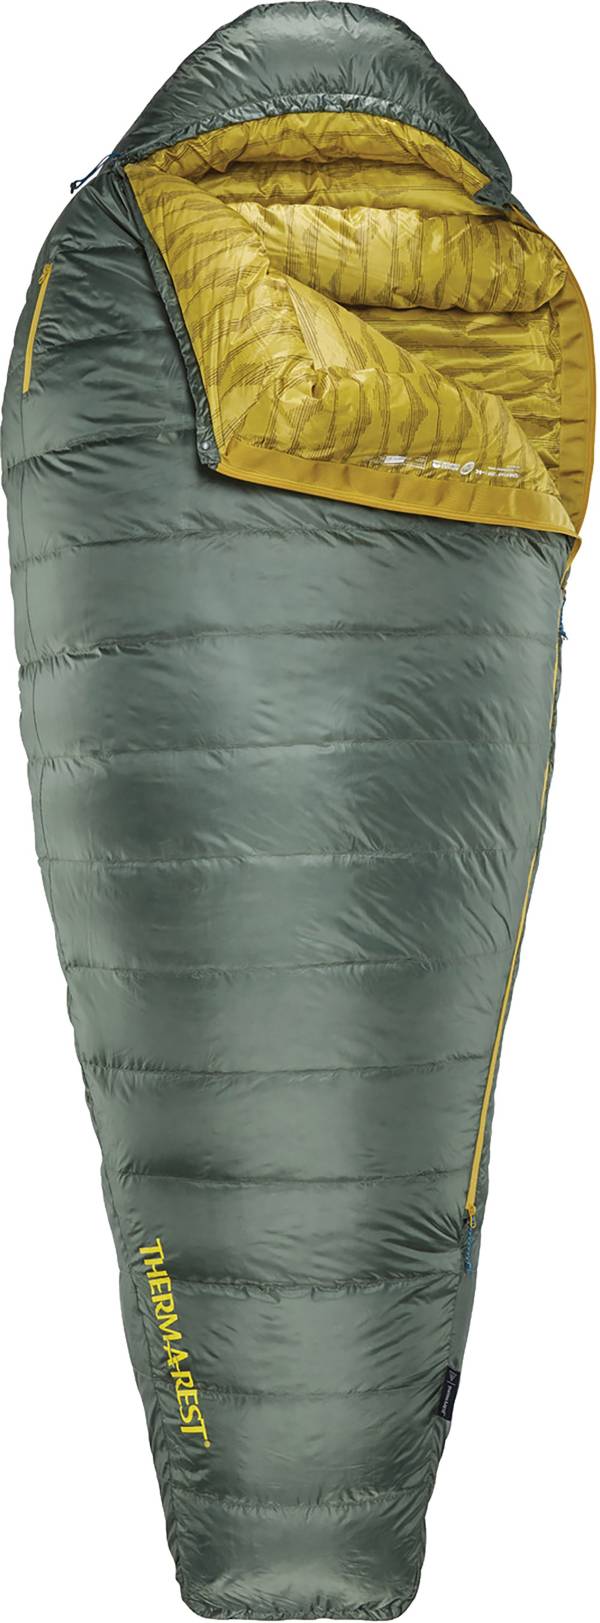 Therm-a-Rest Questar 20 Sleeping Bag product image